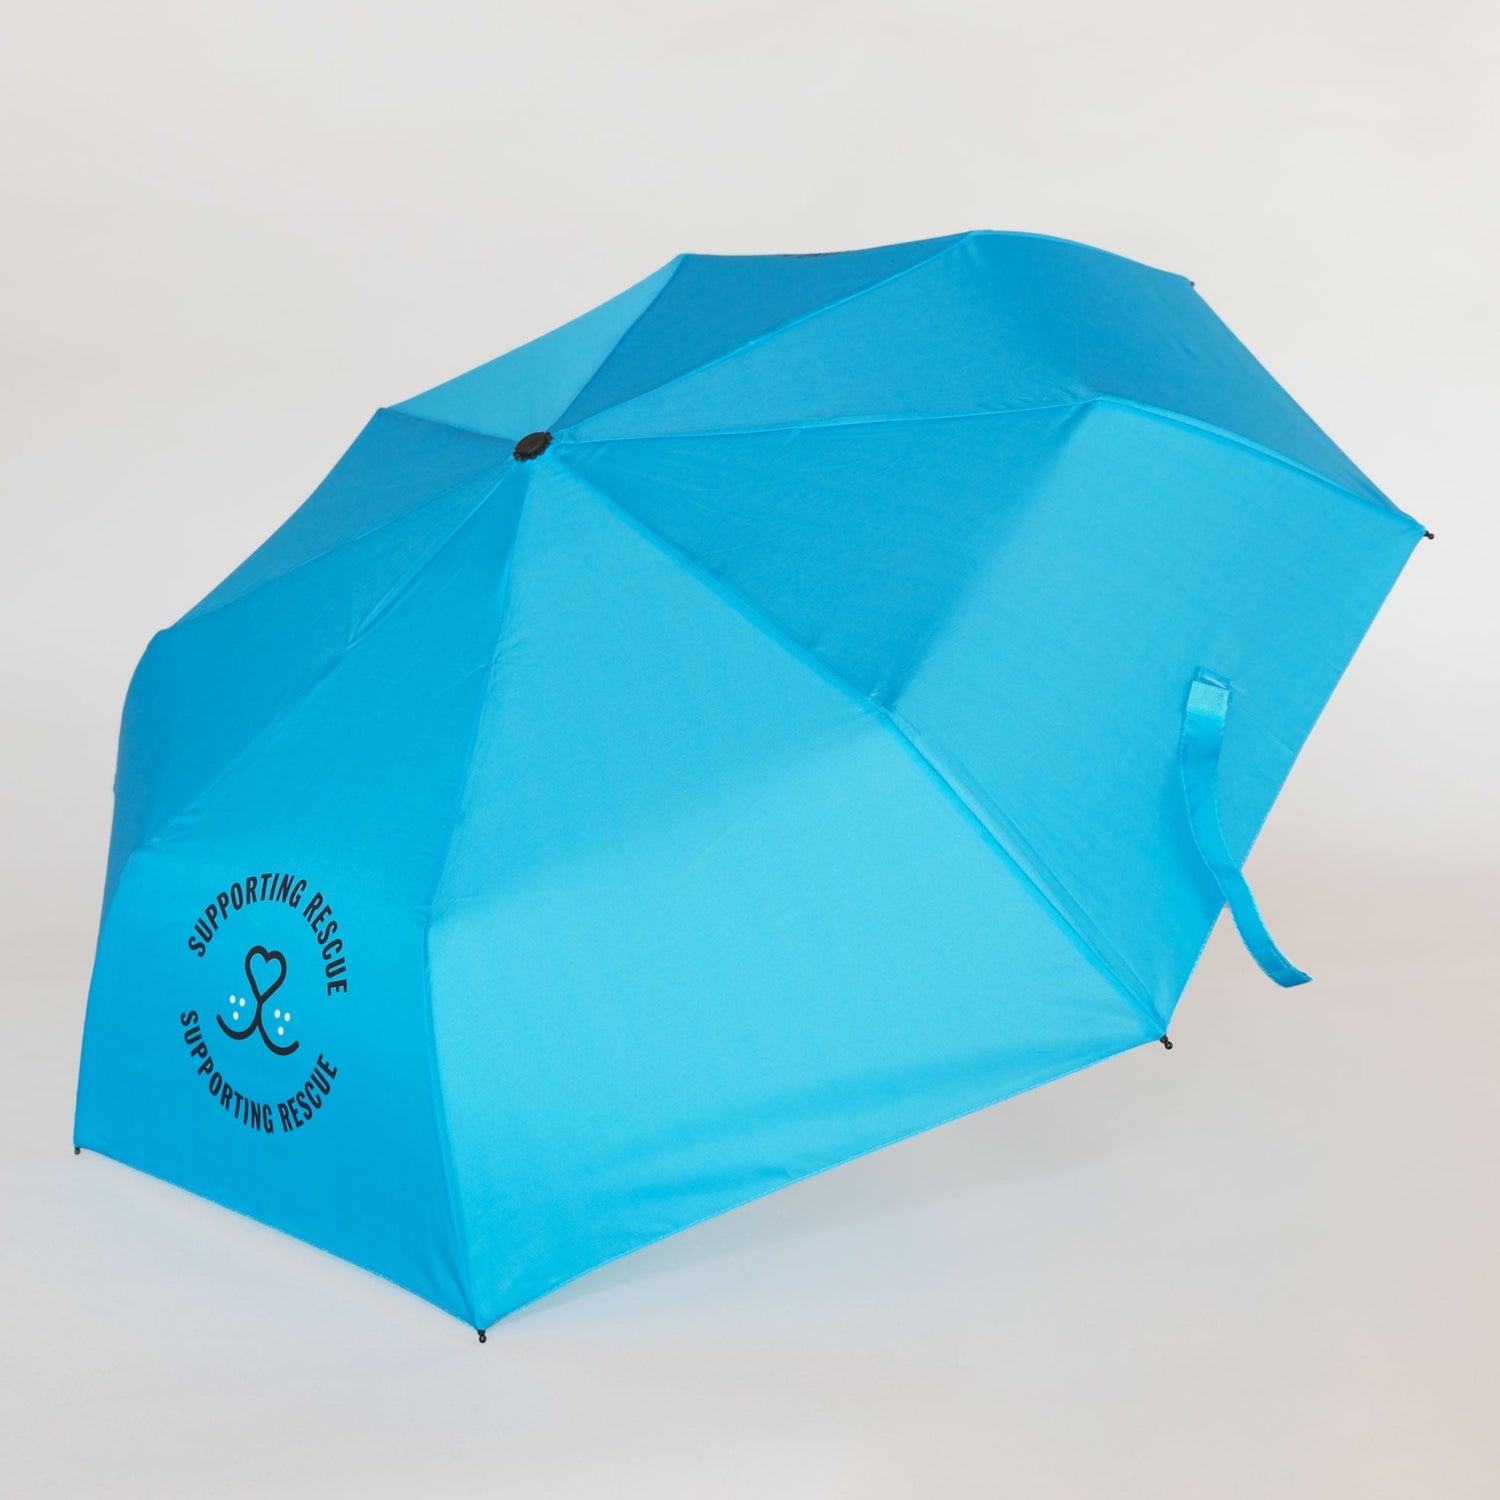 Battersea Wear Blue for Rescue Umbrella, WBFR umbrella, Battersea umbrella, blue umbrella, Wear Blue for Rescue, Battersea, WBFR, Battersea branded, Battersea merchandise, Supporting Rescue, Rescue is my favourite breed, wearblueforrescue, 